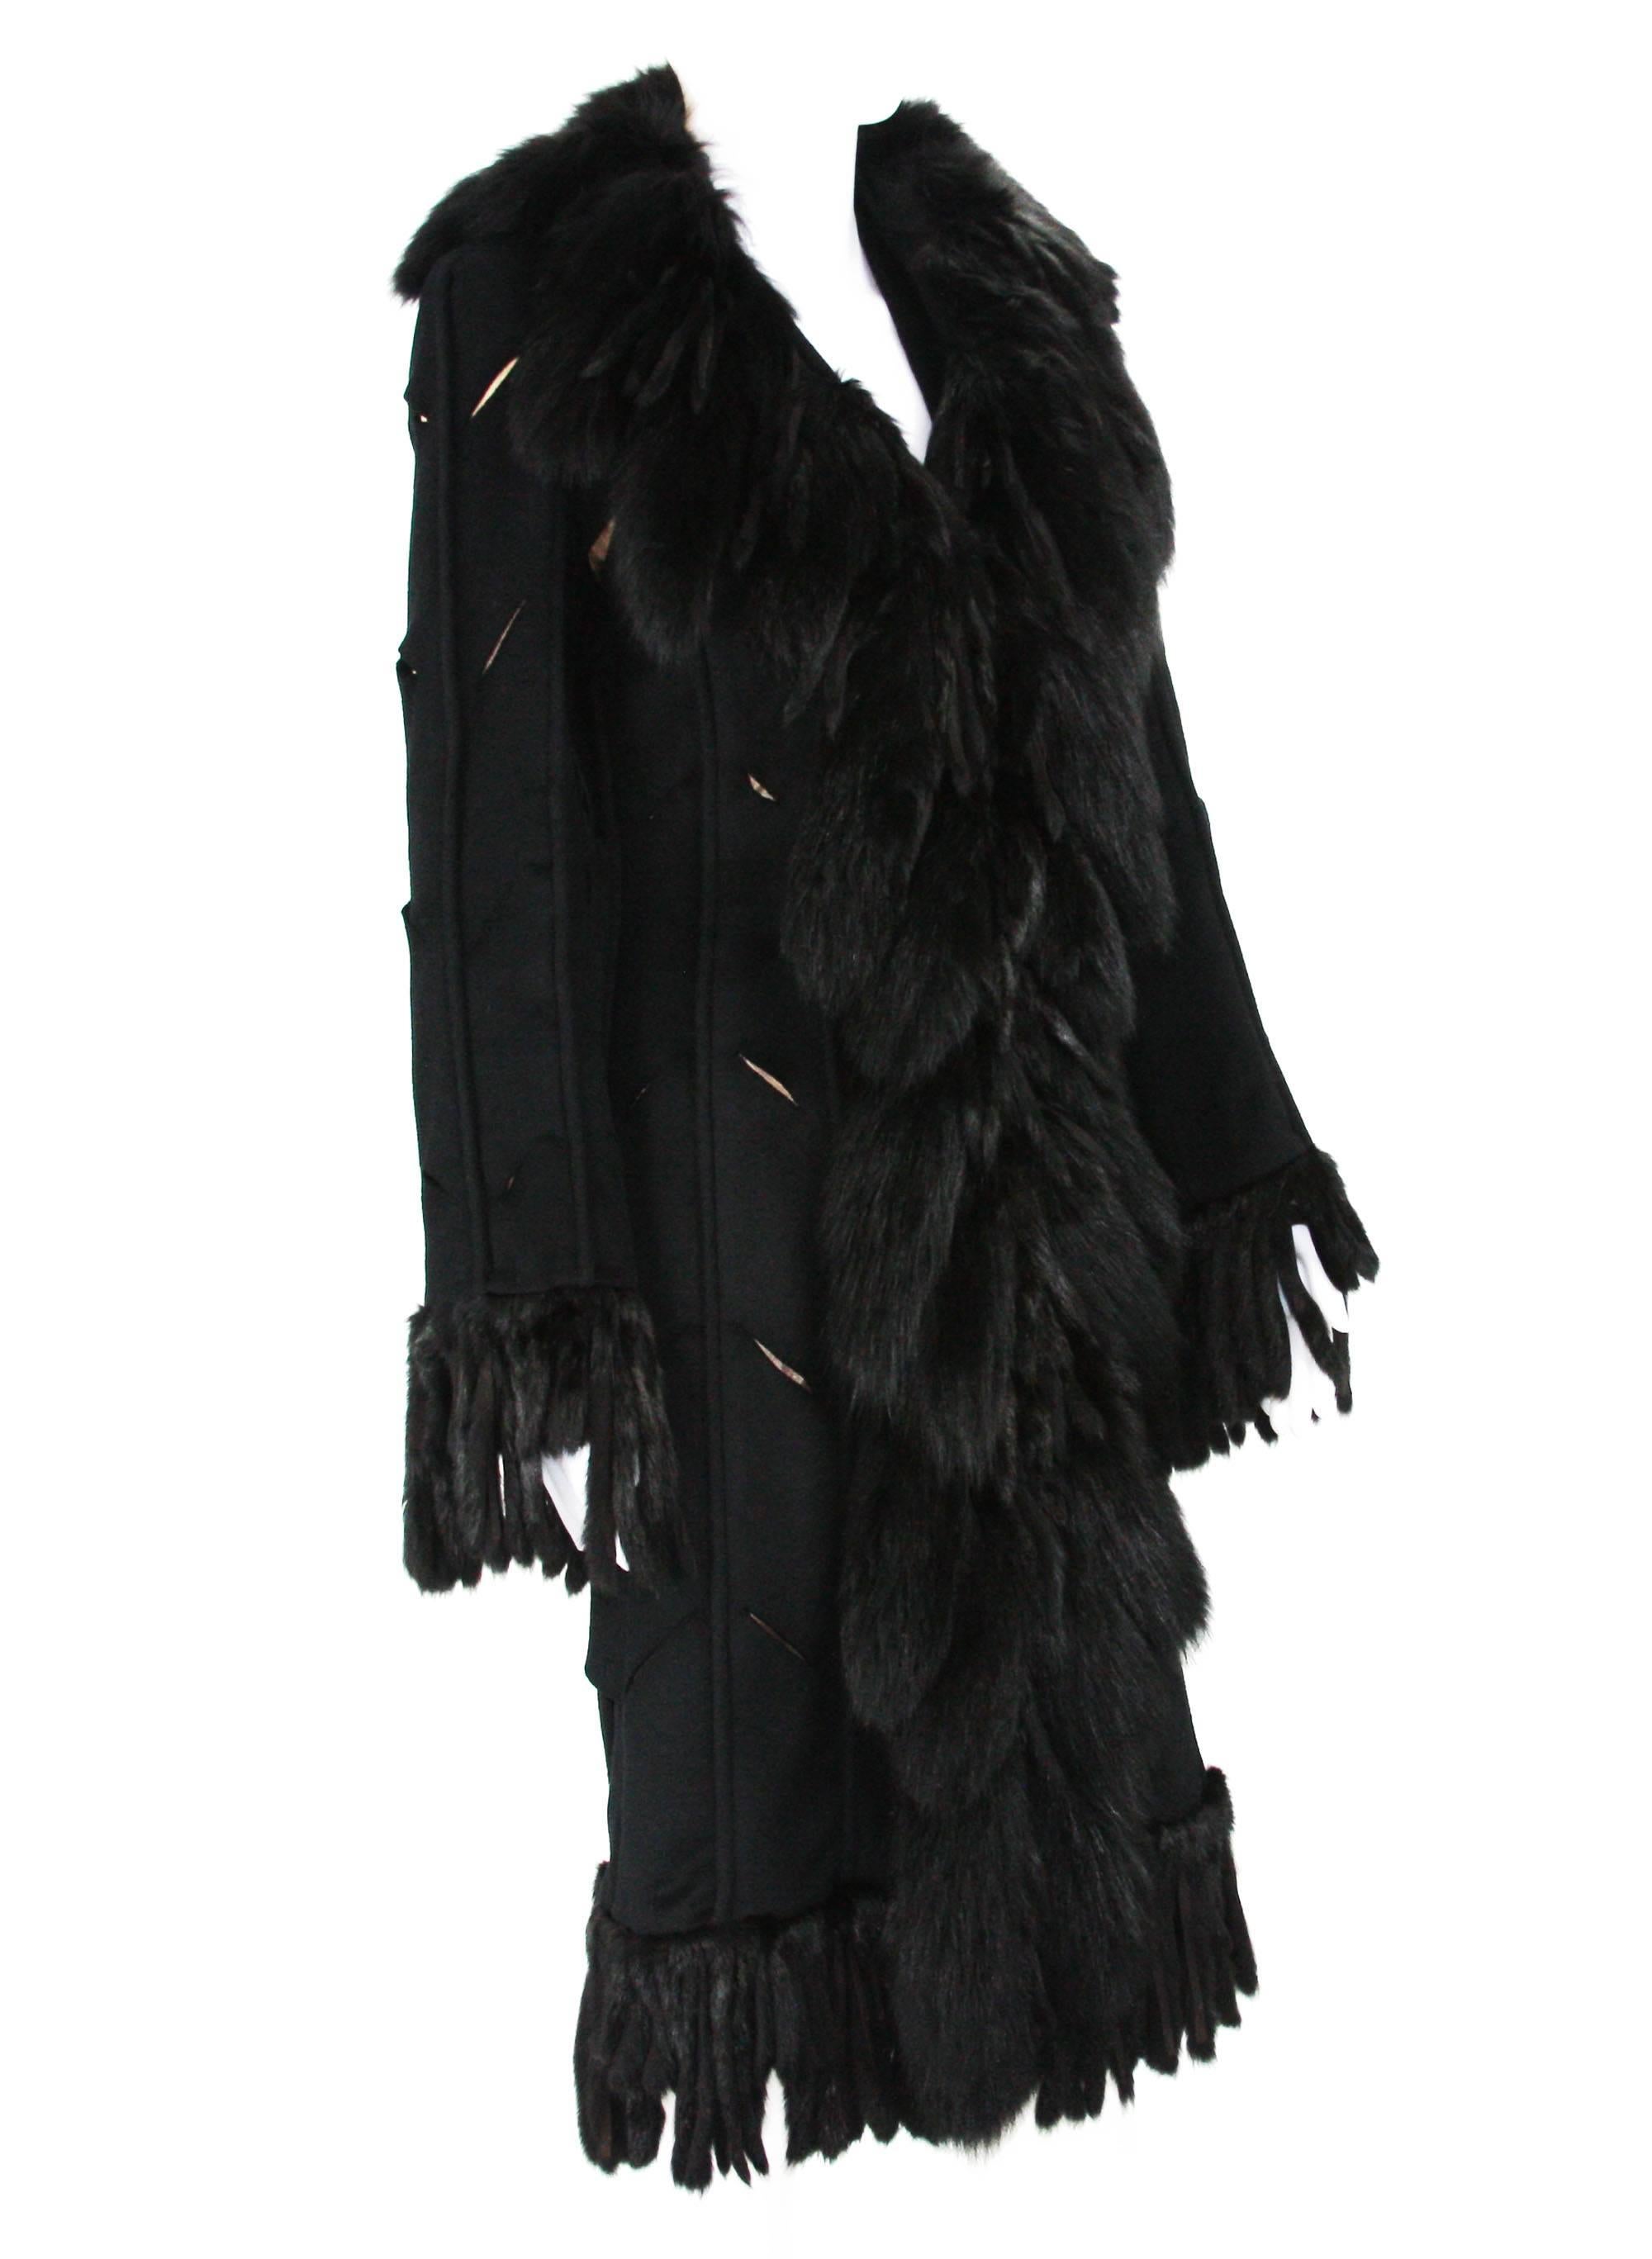 Very Unique Versace Fox Embellished Black Coat
Italian size 38
Multiple sizes Fox Fringes, Cut Out Details with Beige Background Around Entire Coat, Hook and Eye Closure, Fully Lined in Black Versace Logo Lining.
46% Angora, 34% Wool, 12% Fox, 8%